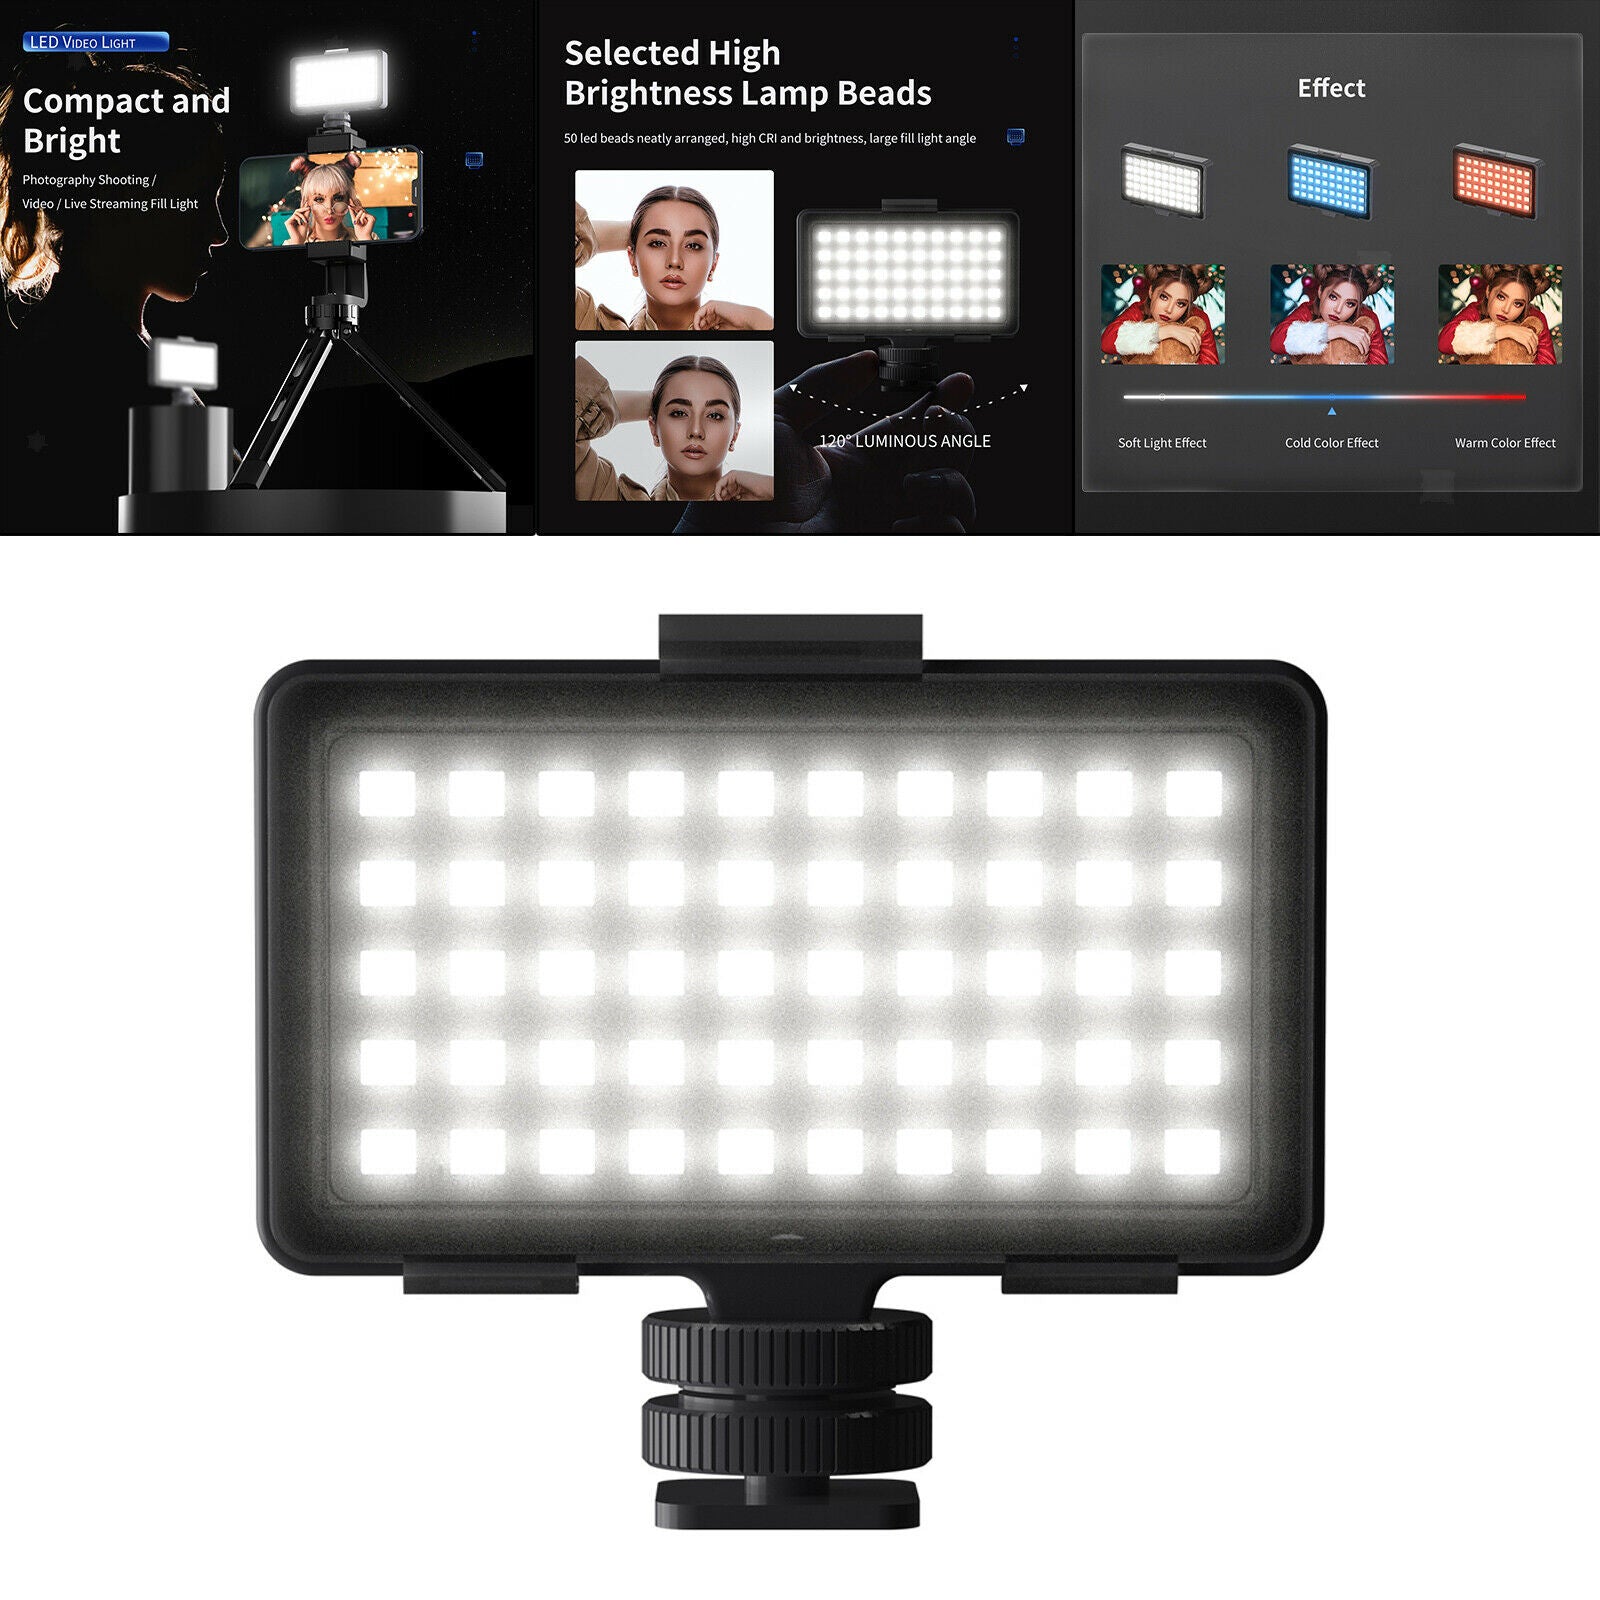 LED Camera Light for Camera Photography Rechargeable Full Color Portable